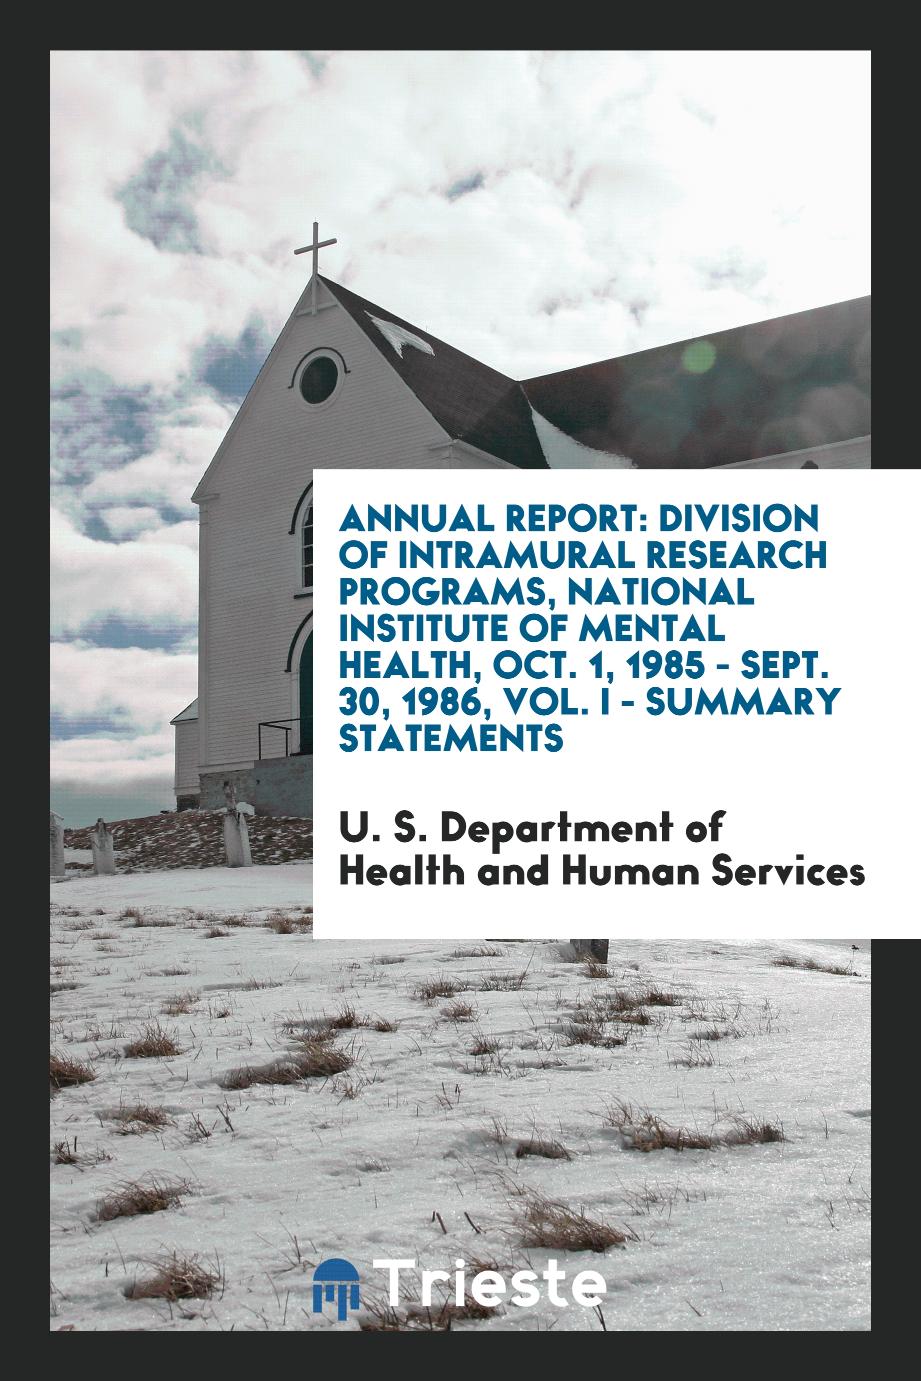 Annual report: Division of Intramural Research Programs, National Institute of Mental Health, Oct. 1, 1985 - Sept. 30, 1986, Vol. I - summary statements